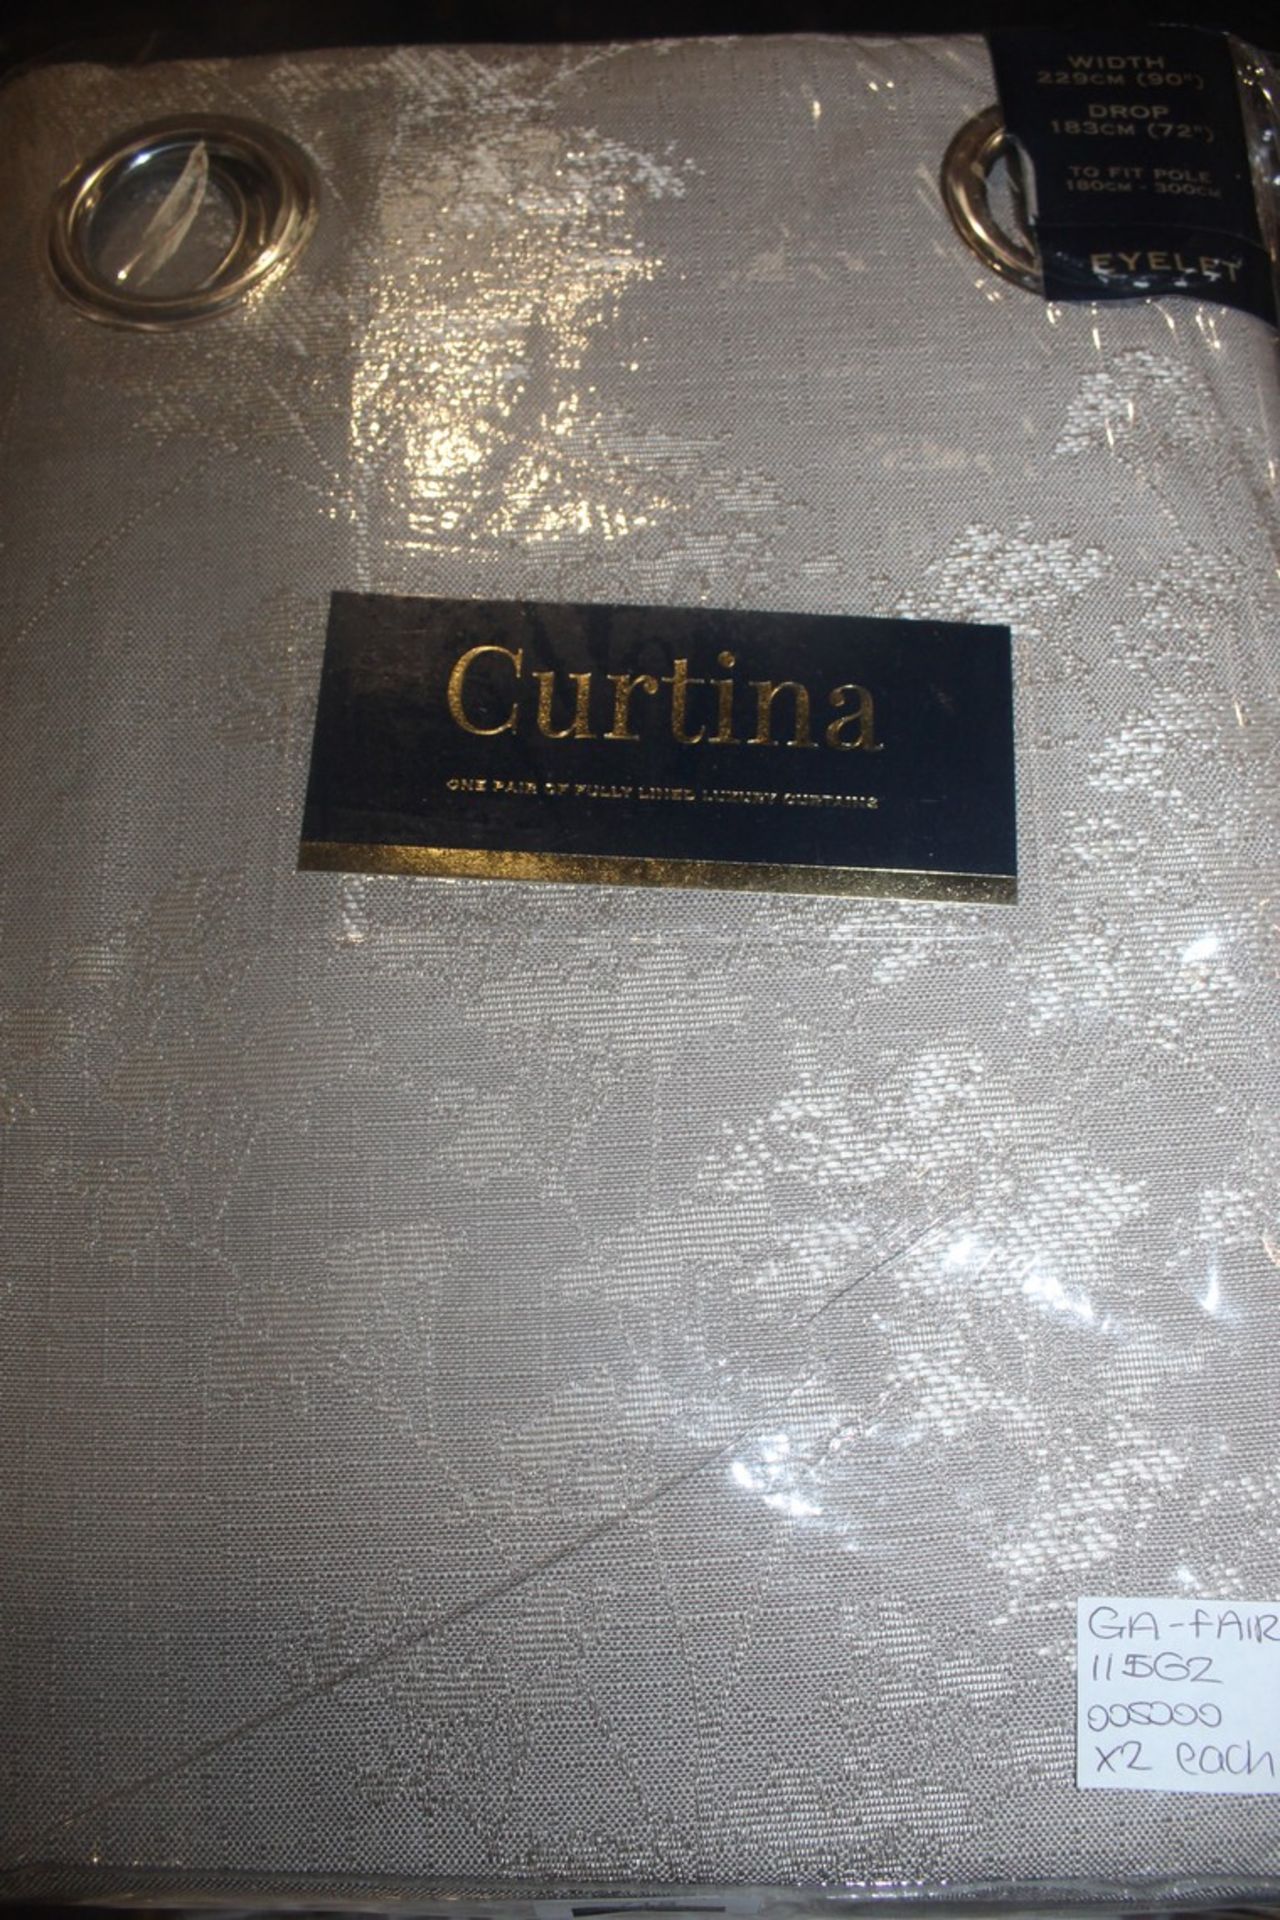 Pairs Of Curtina Elmwood Stone 90 x 72" Designer Eyelet Headed Curtains RRP £50 Each (Pictures Are